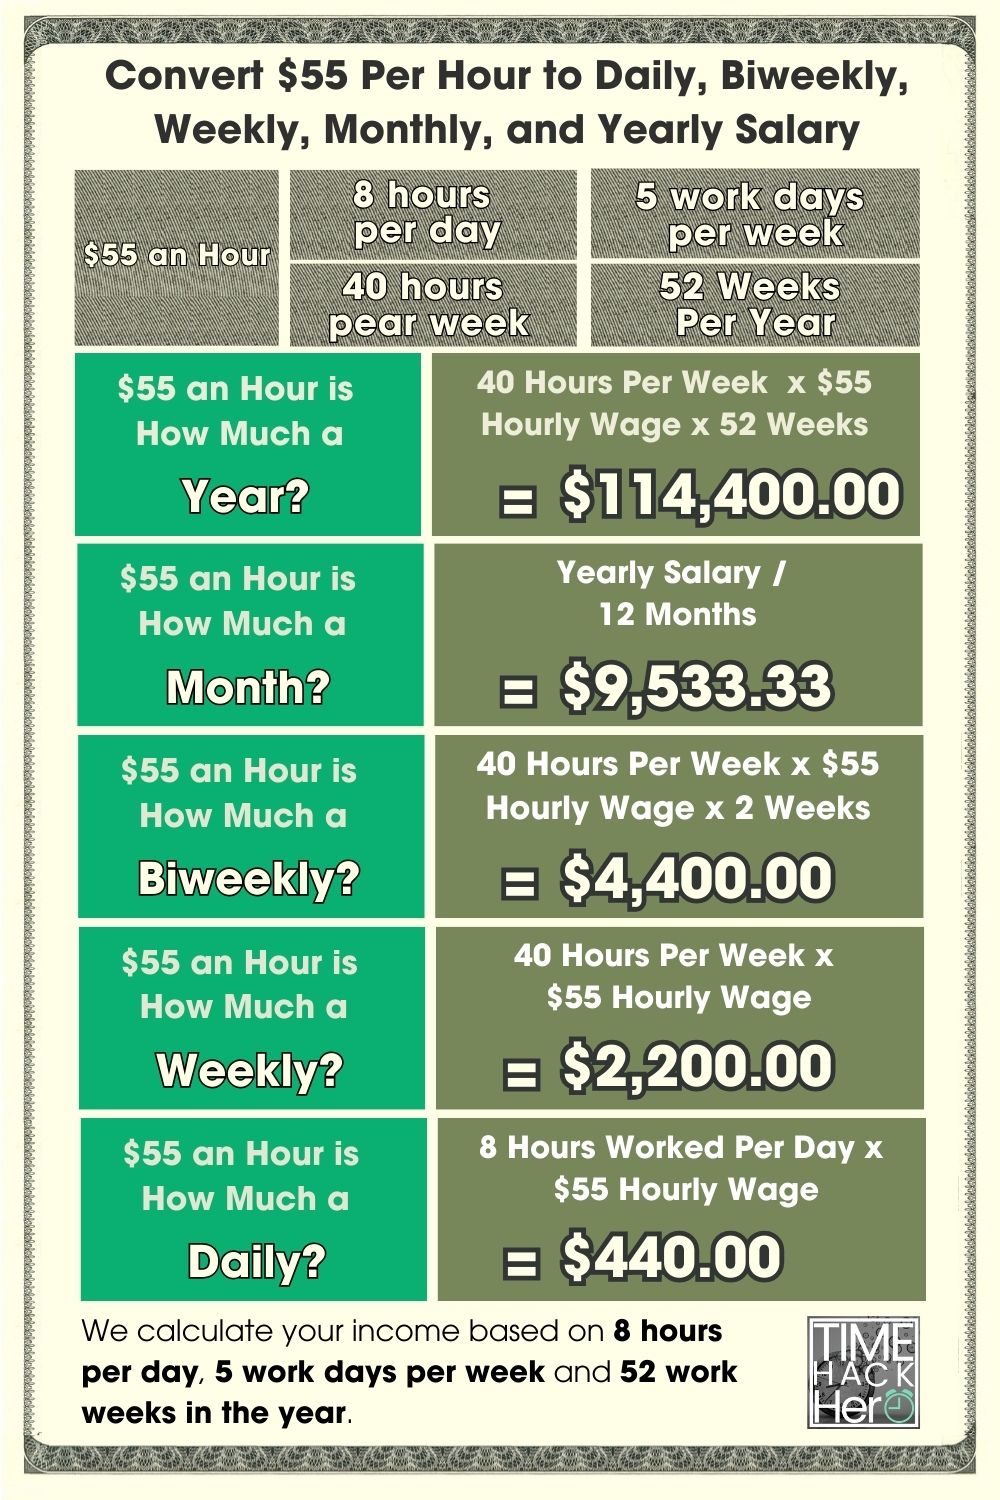 Convert $55 Per Hour to Daily, Biweekly, Weekly, Monthly, and Yearly Salary